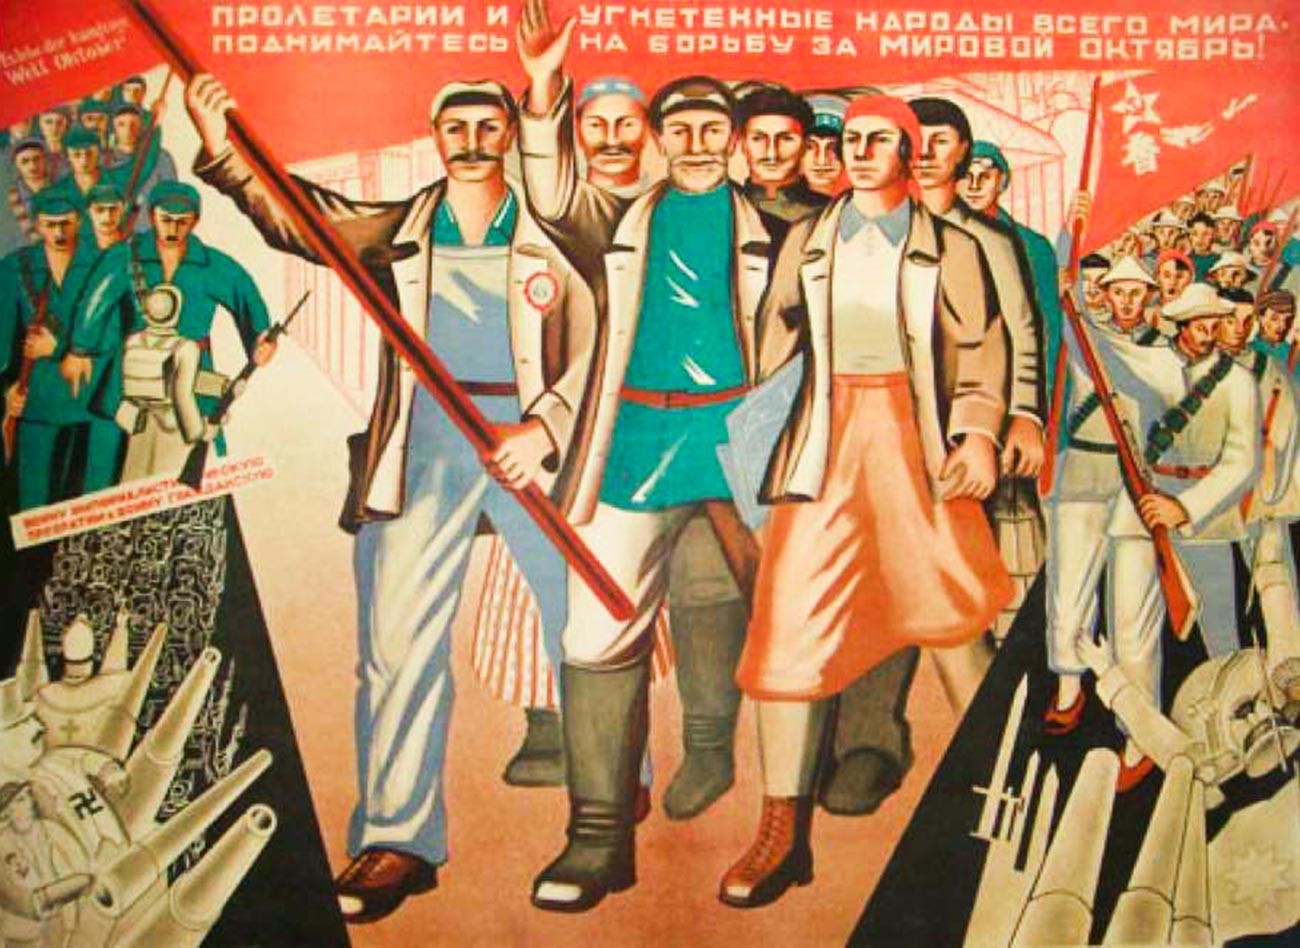 Proletarians and subjugated peoples of the world, rise to fight a war for the global October!